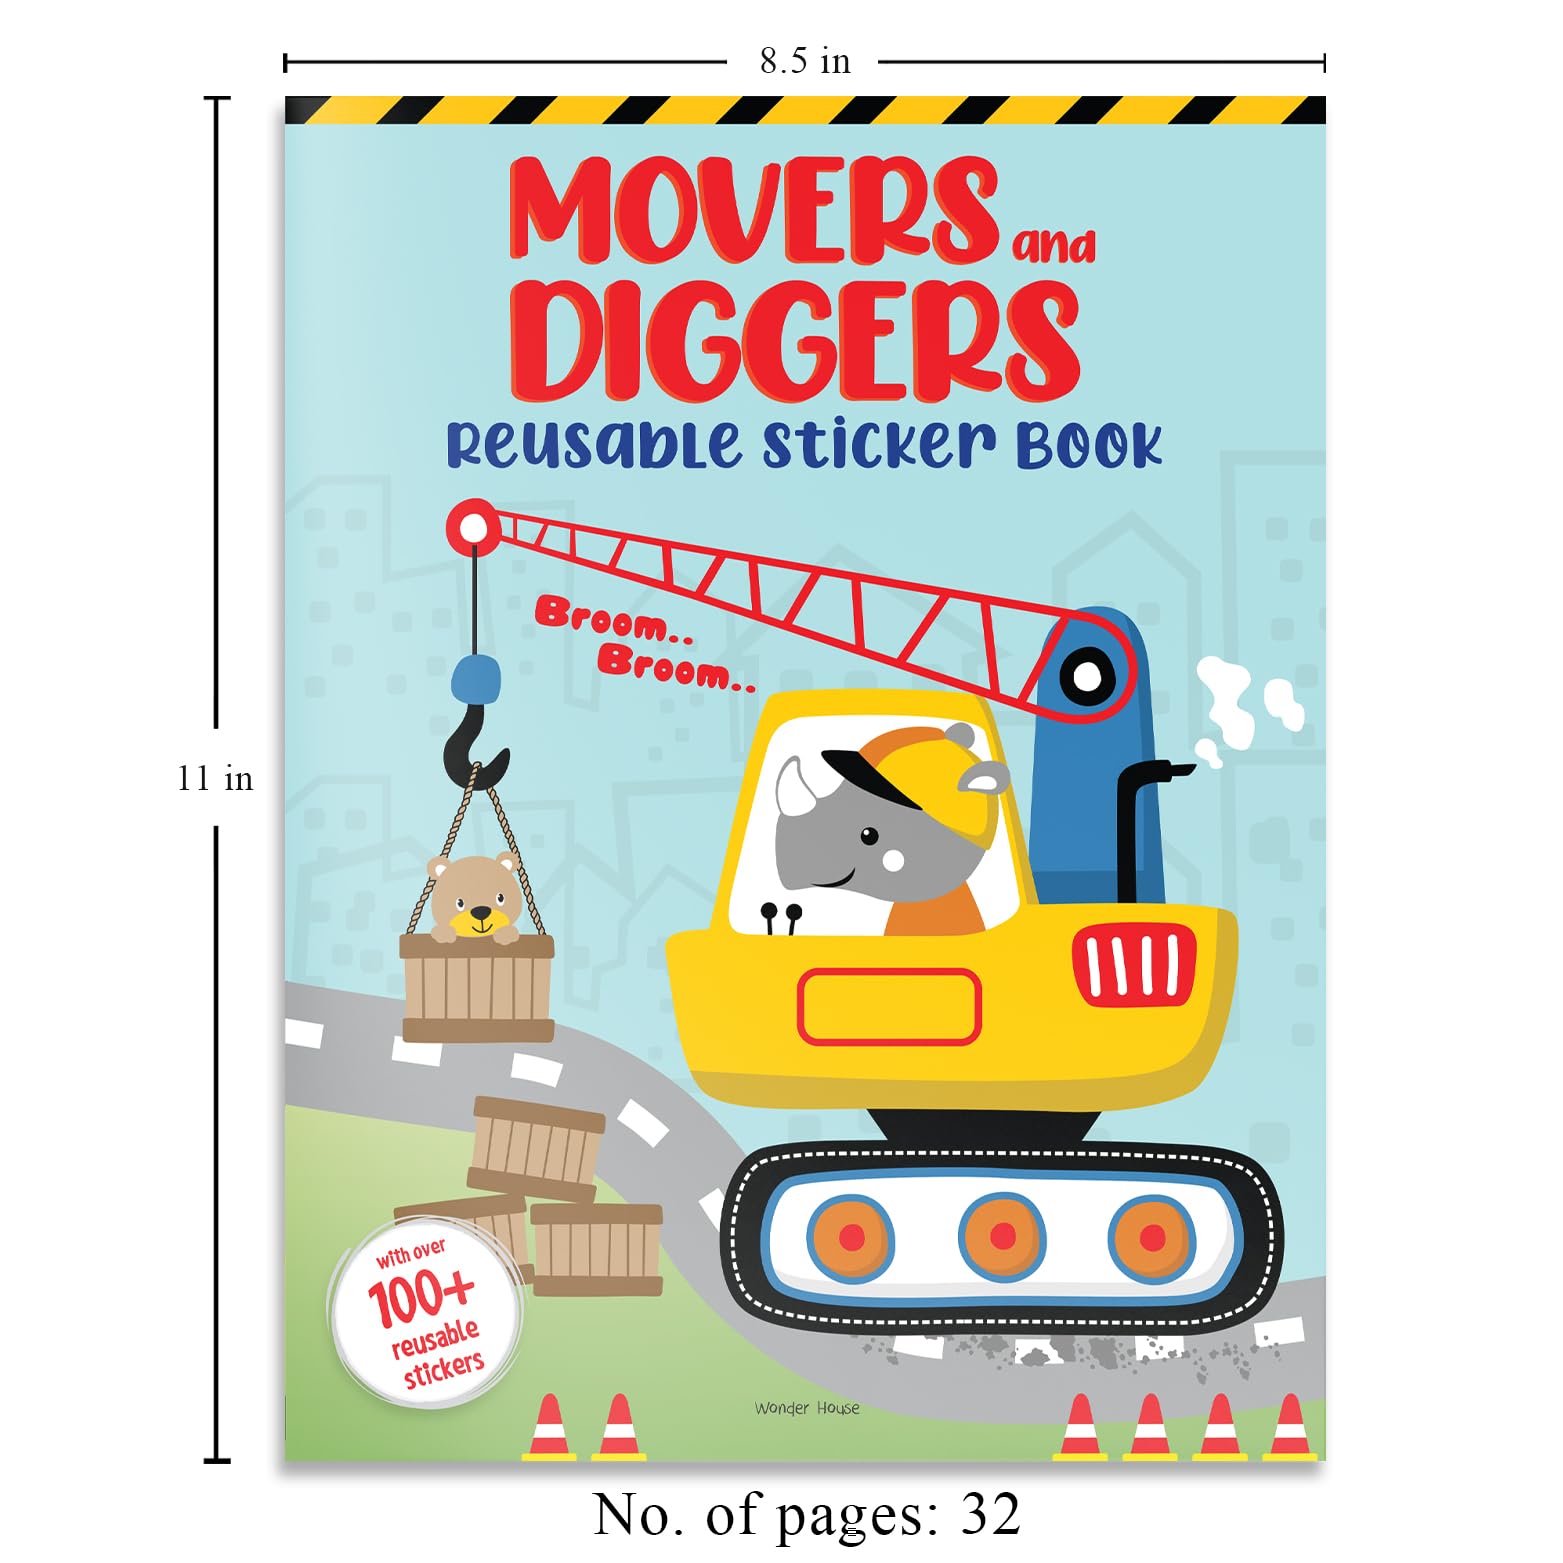 Movers and Diggers Reusable Sticker Book�For Chindren [Paperback] Wonder House Books